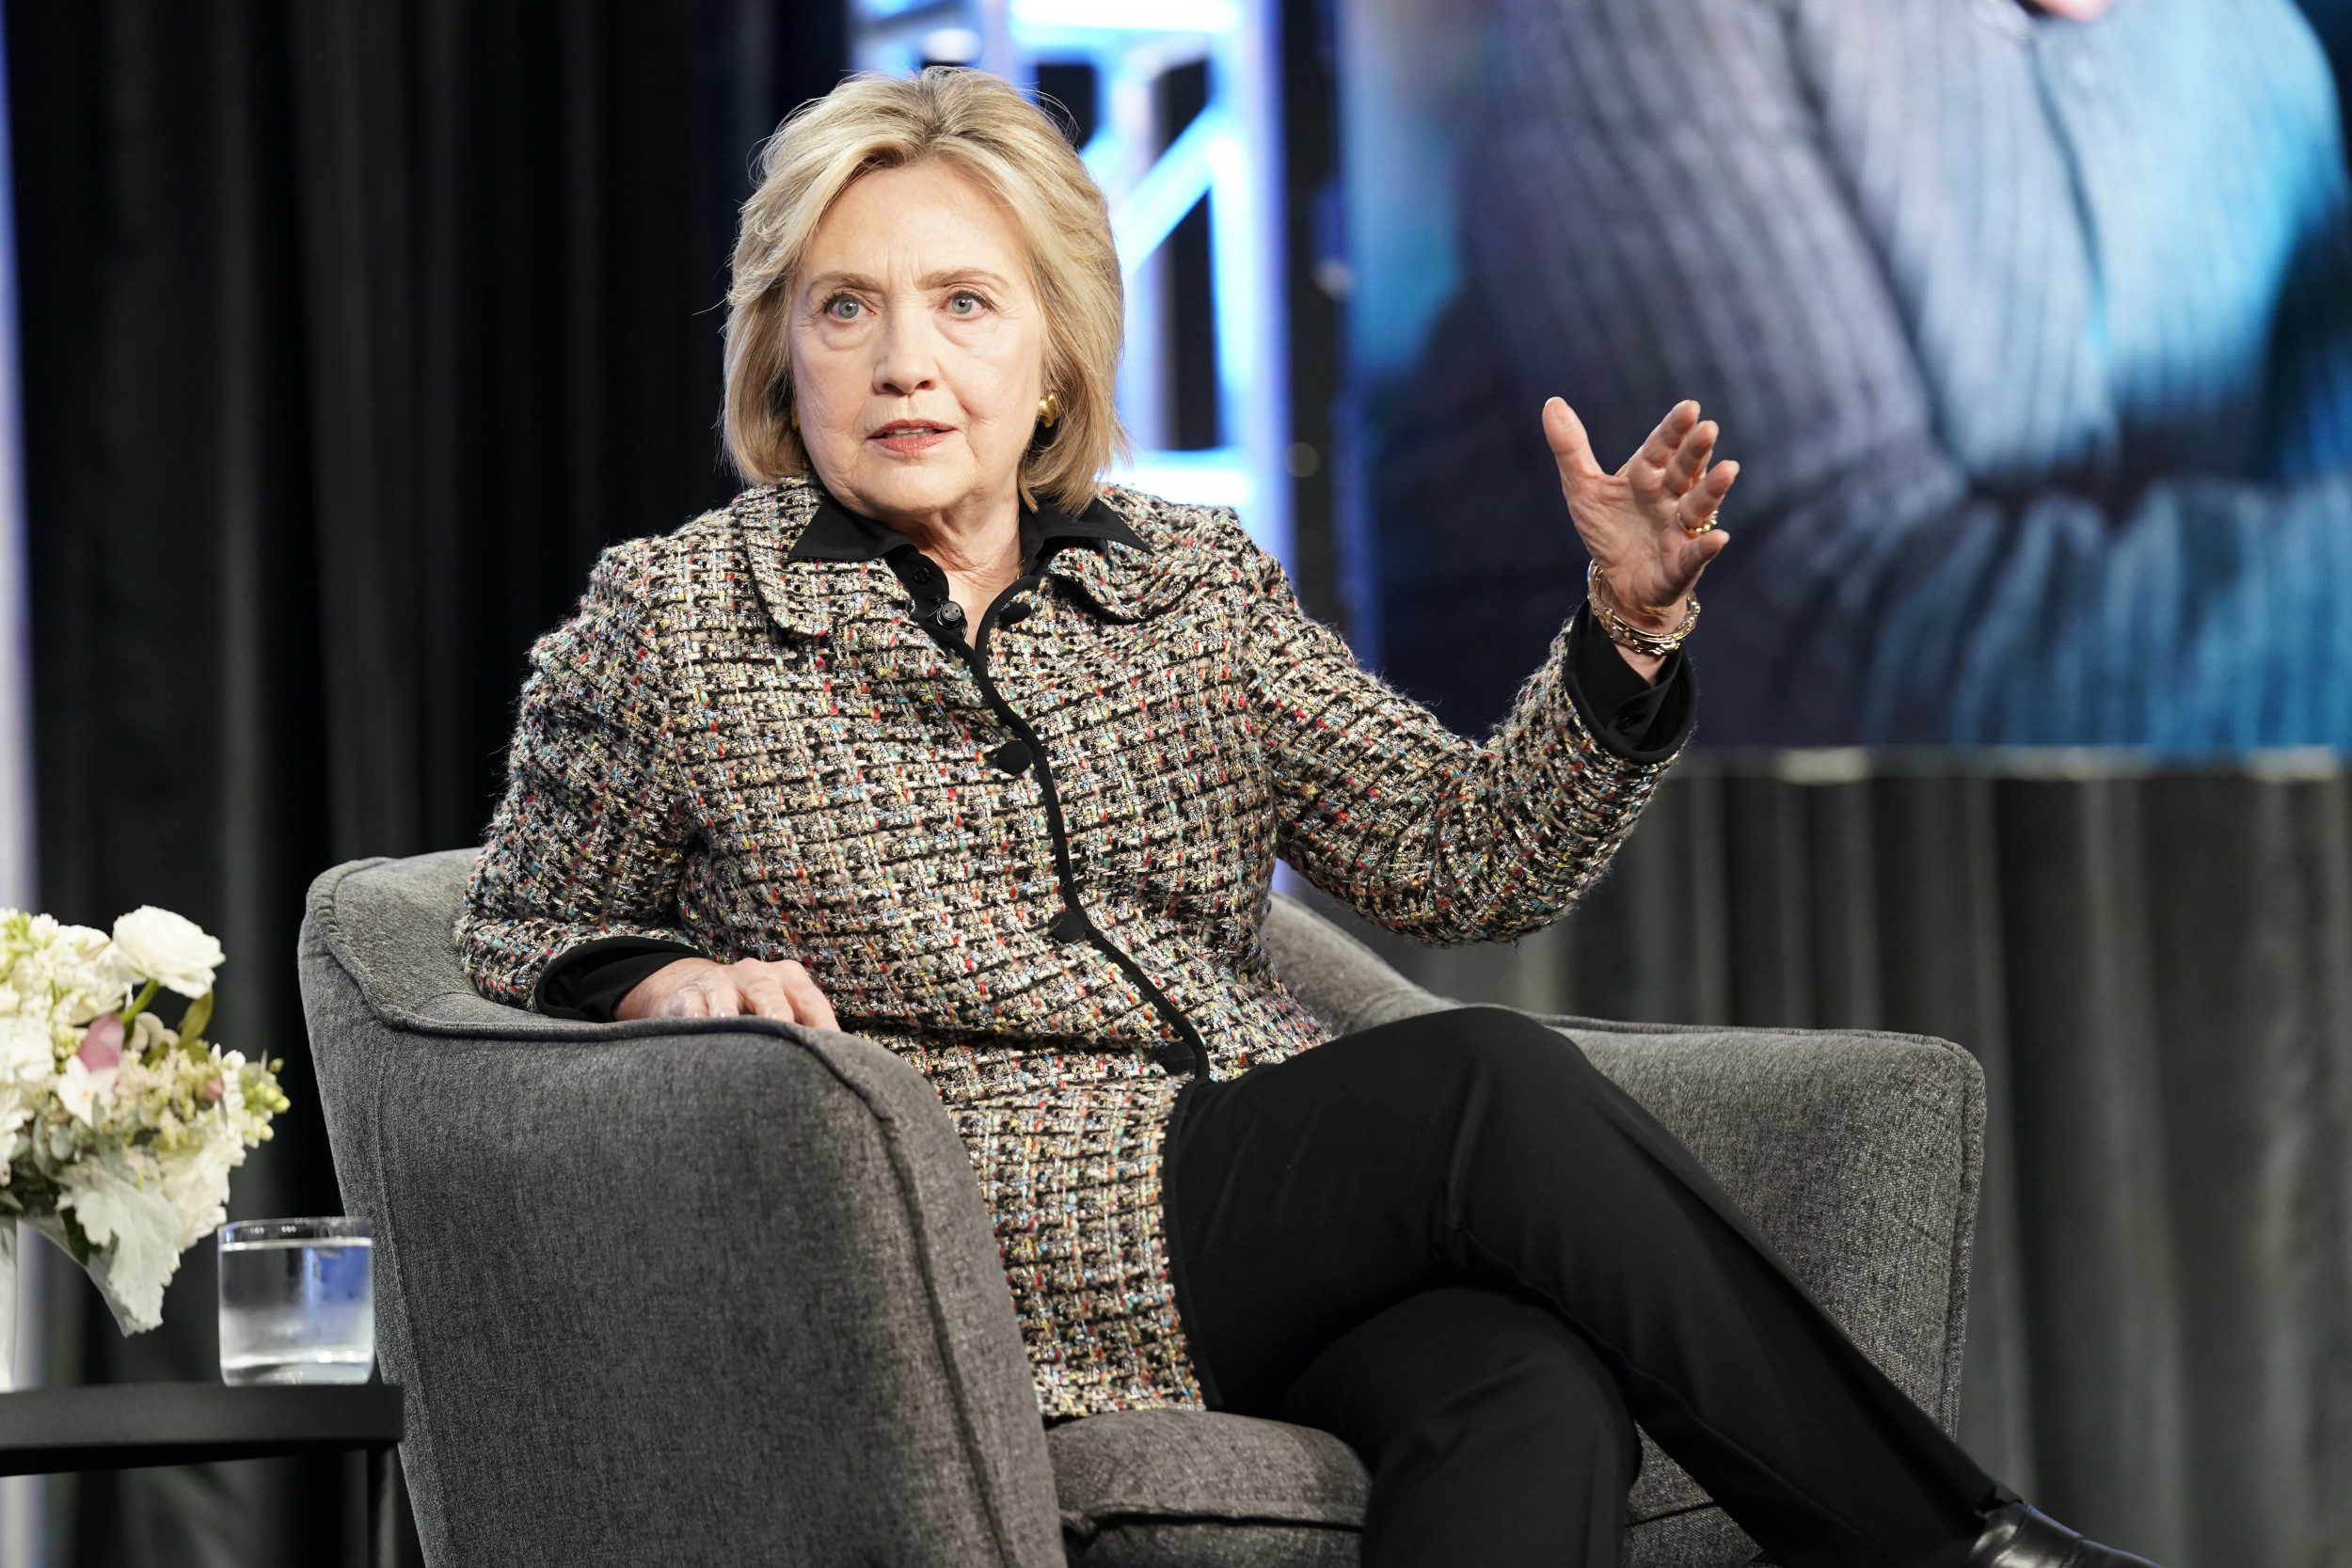 Hillary Clinton defends Harvey Weinstein association: "How could we ha...